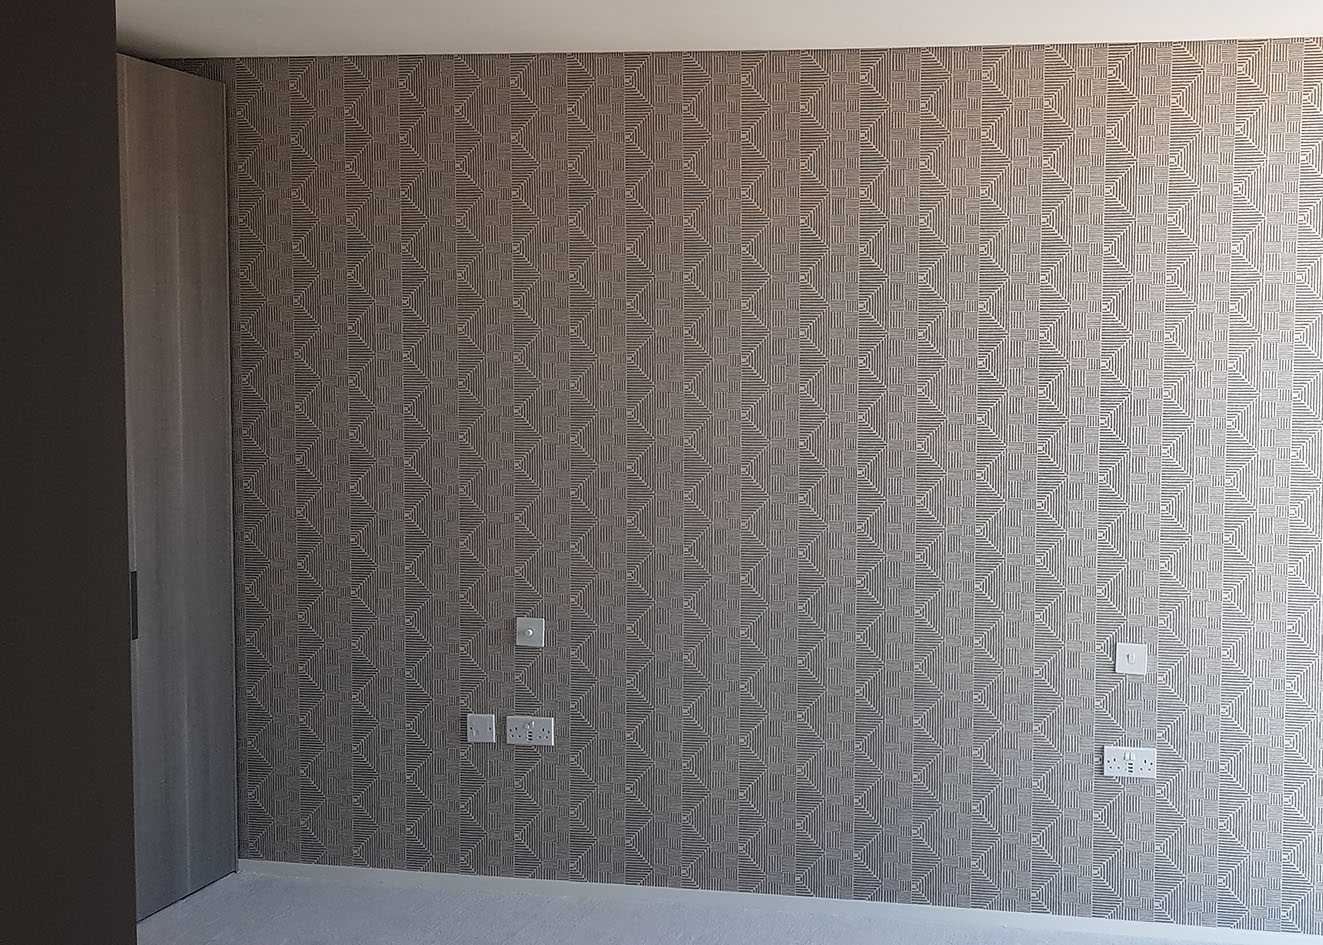 Featured wall wallpaper installed by wallpaper hangers specialists.